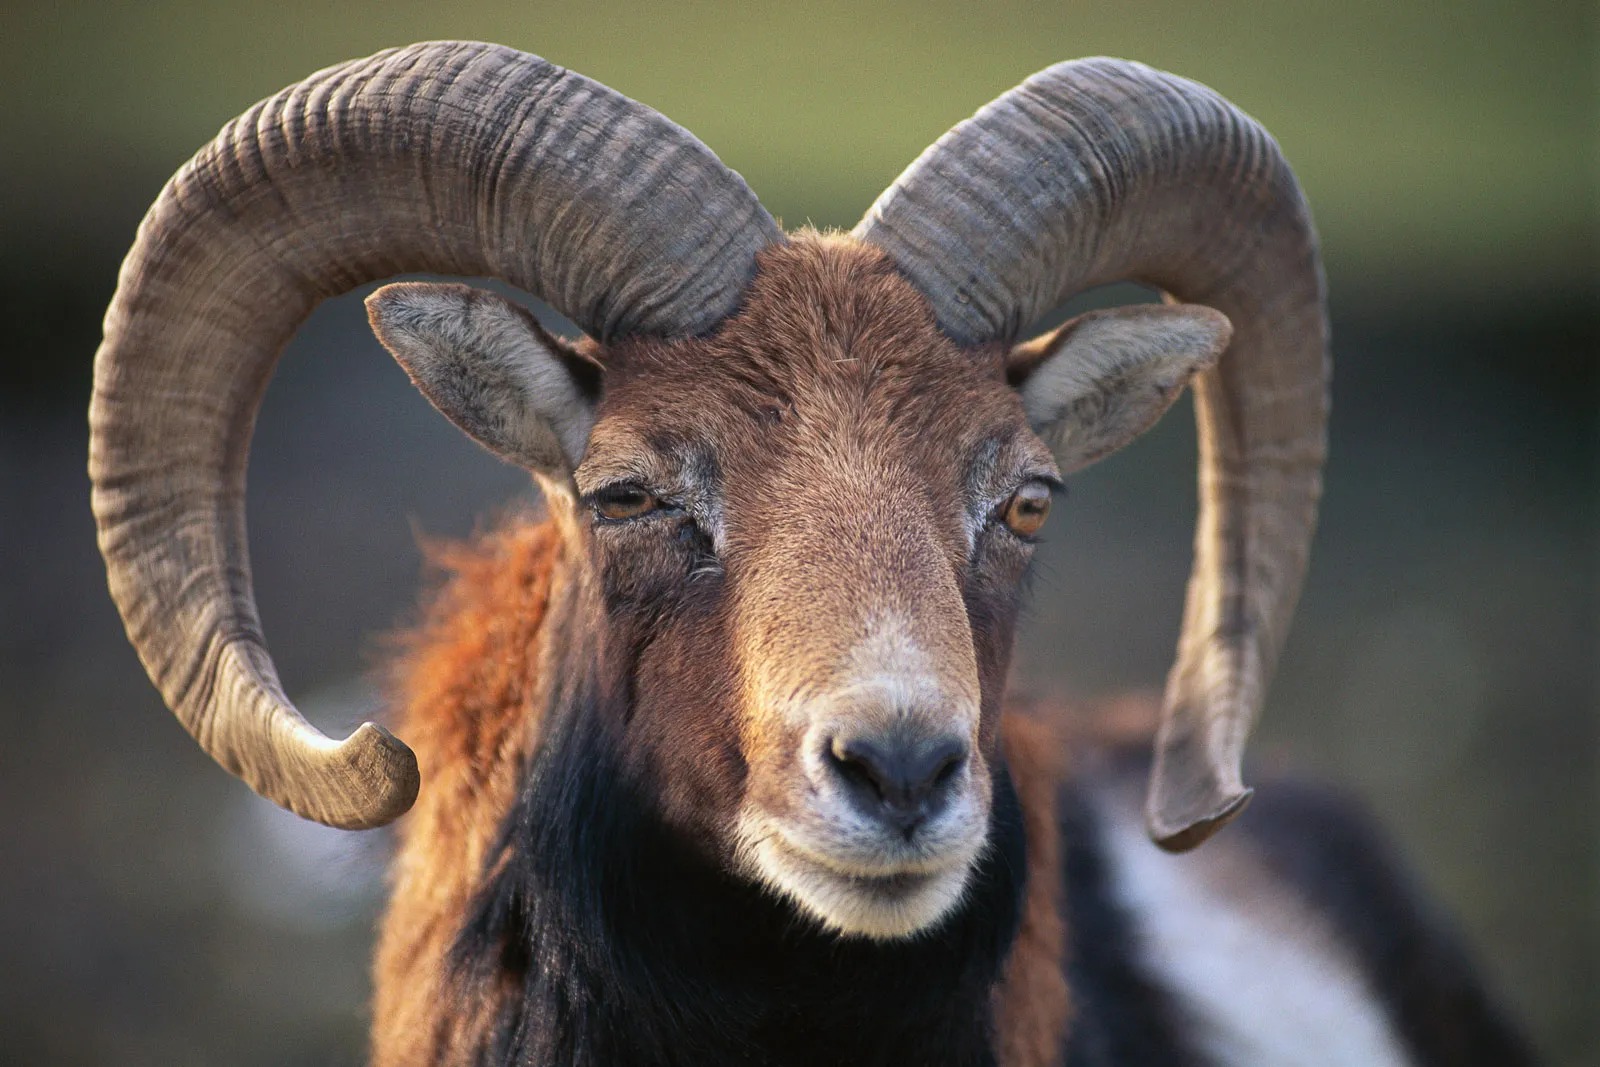 Hey, I Bet You Can't Get 14 on This Positive or Negative Word Quiz Mouflon ram male sheep